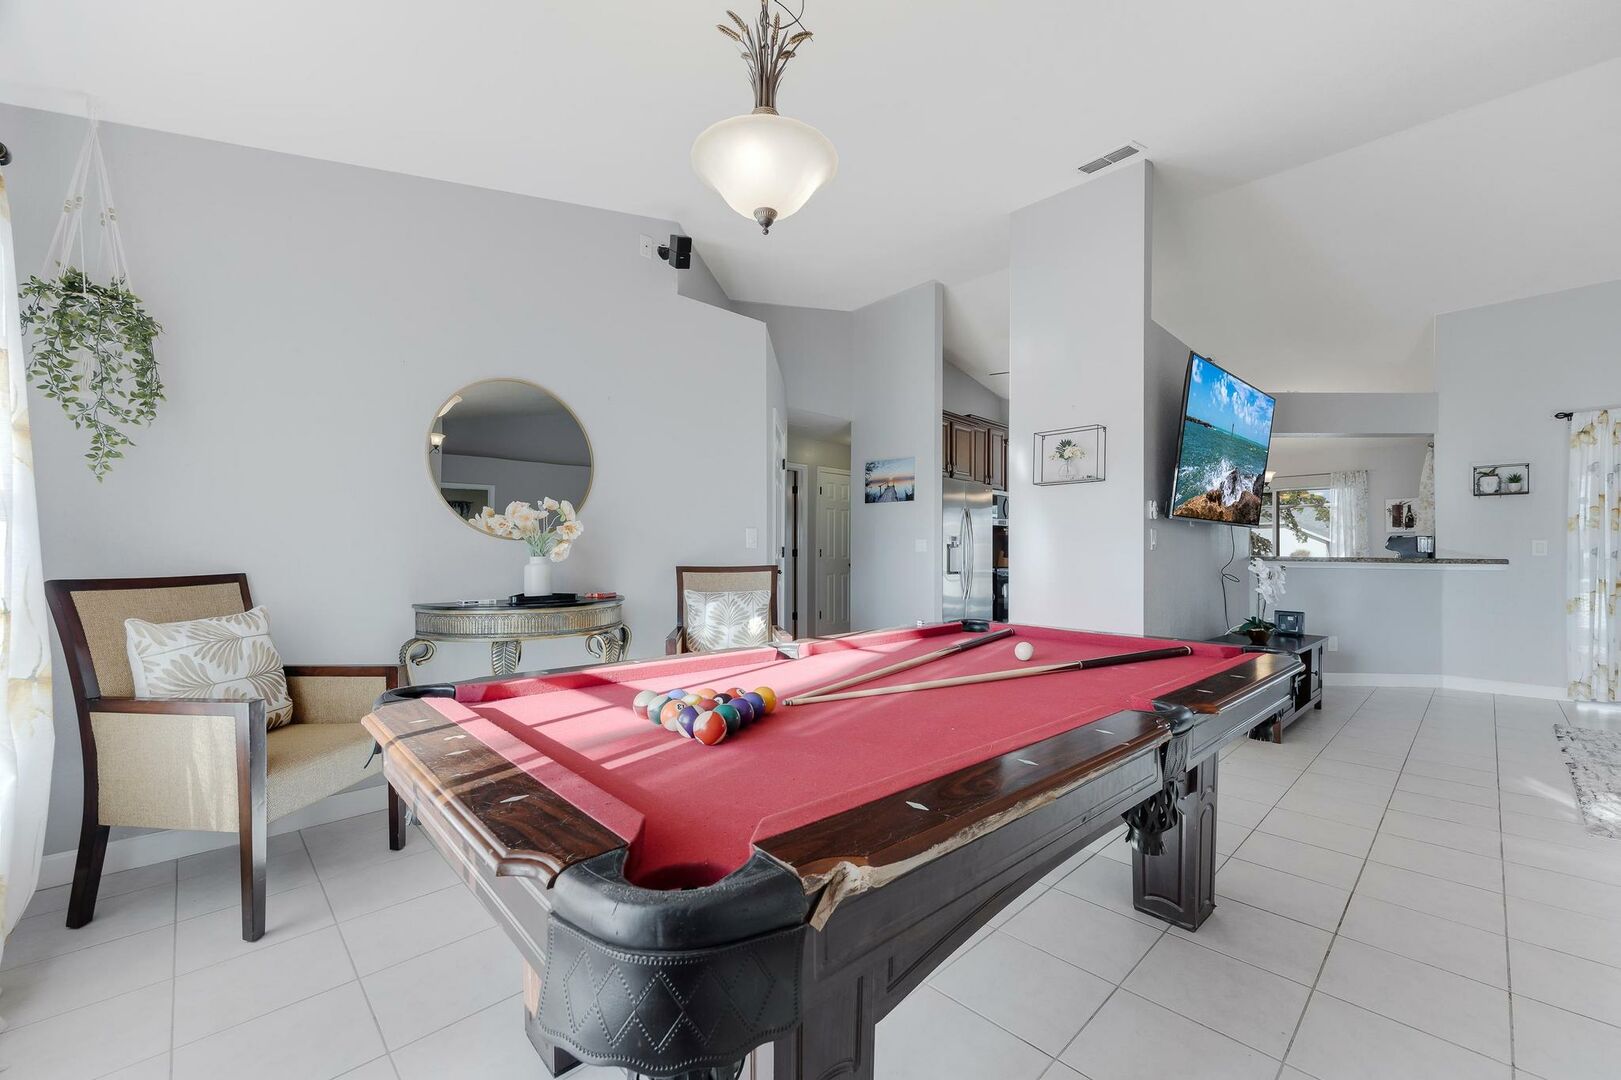 Pool table in vacation rental